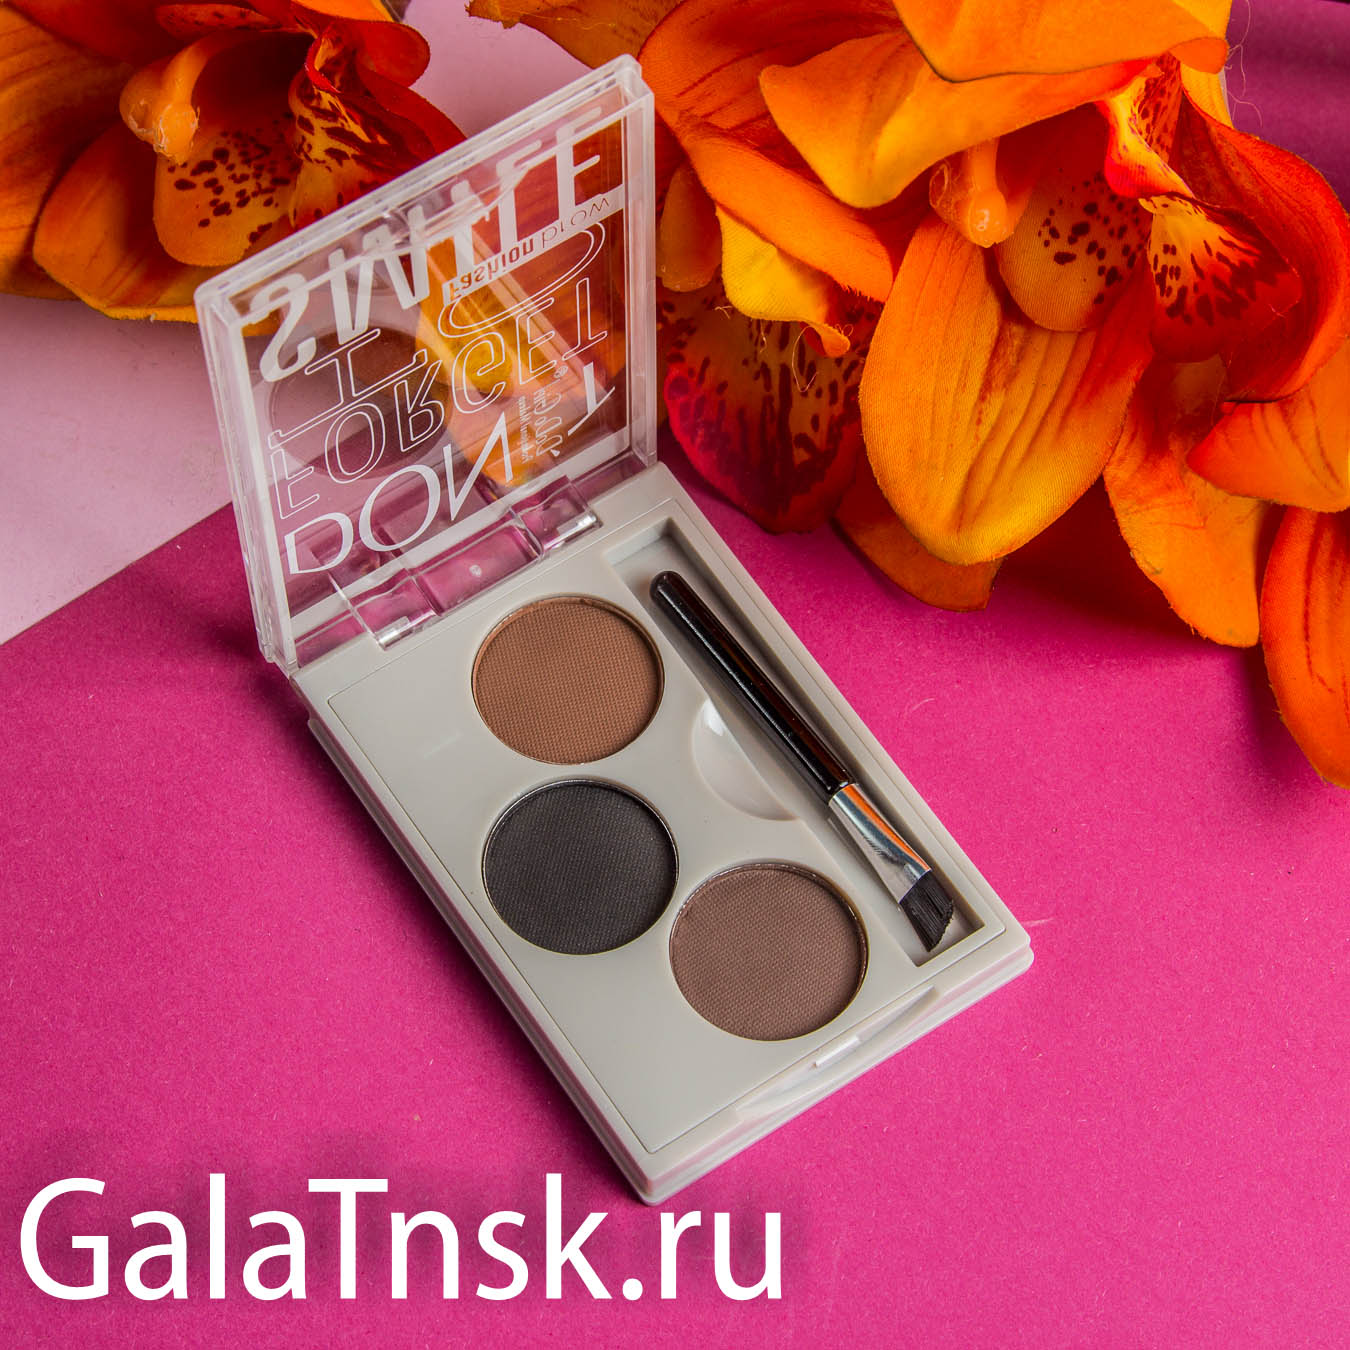 DO DO GIPL Тени для бровей 3colors DON`T FORGET TO SMILE BP022 04